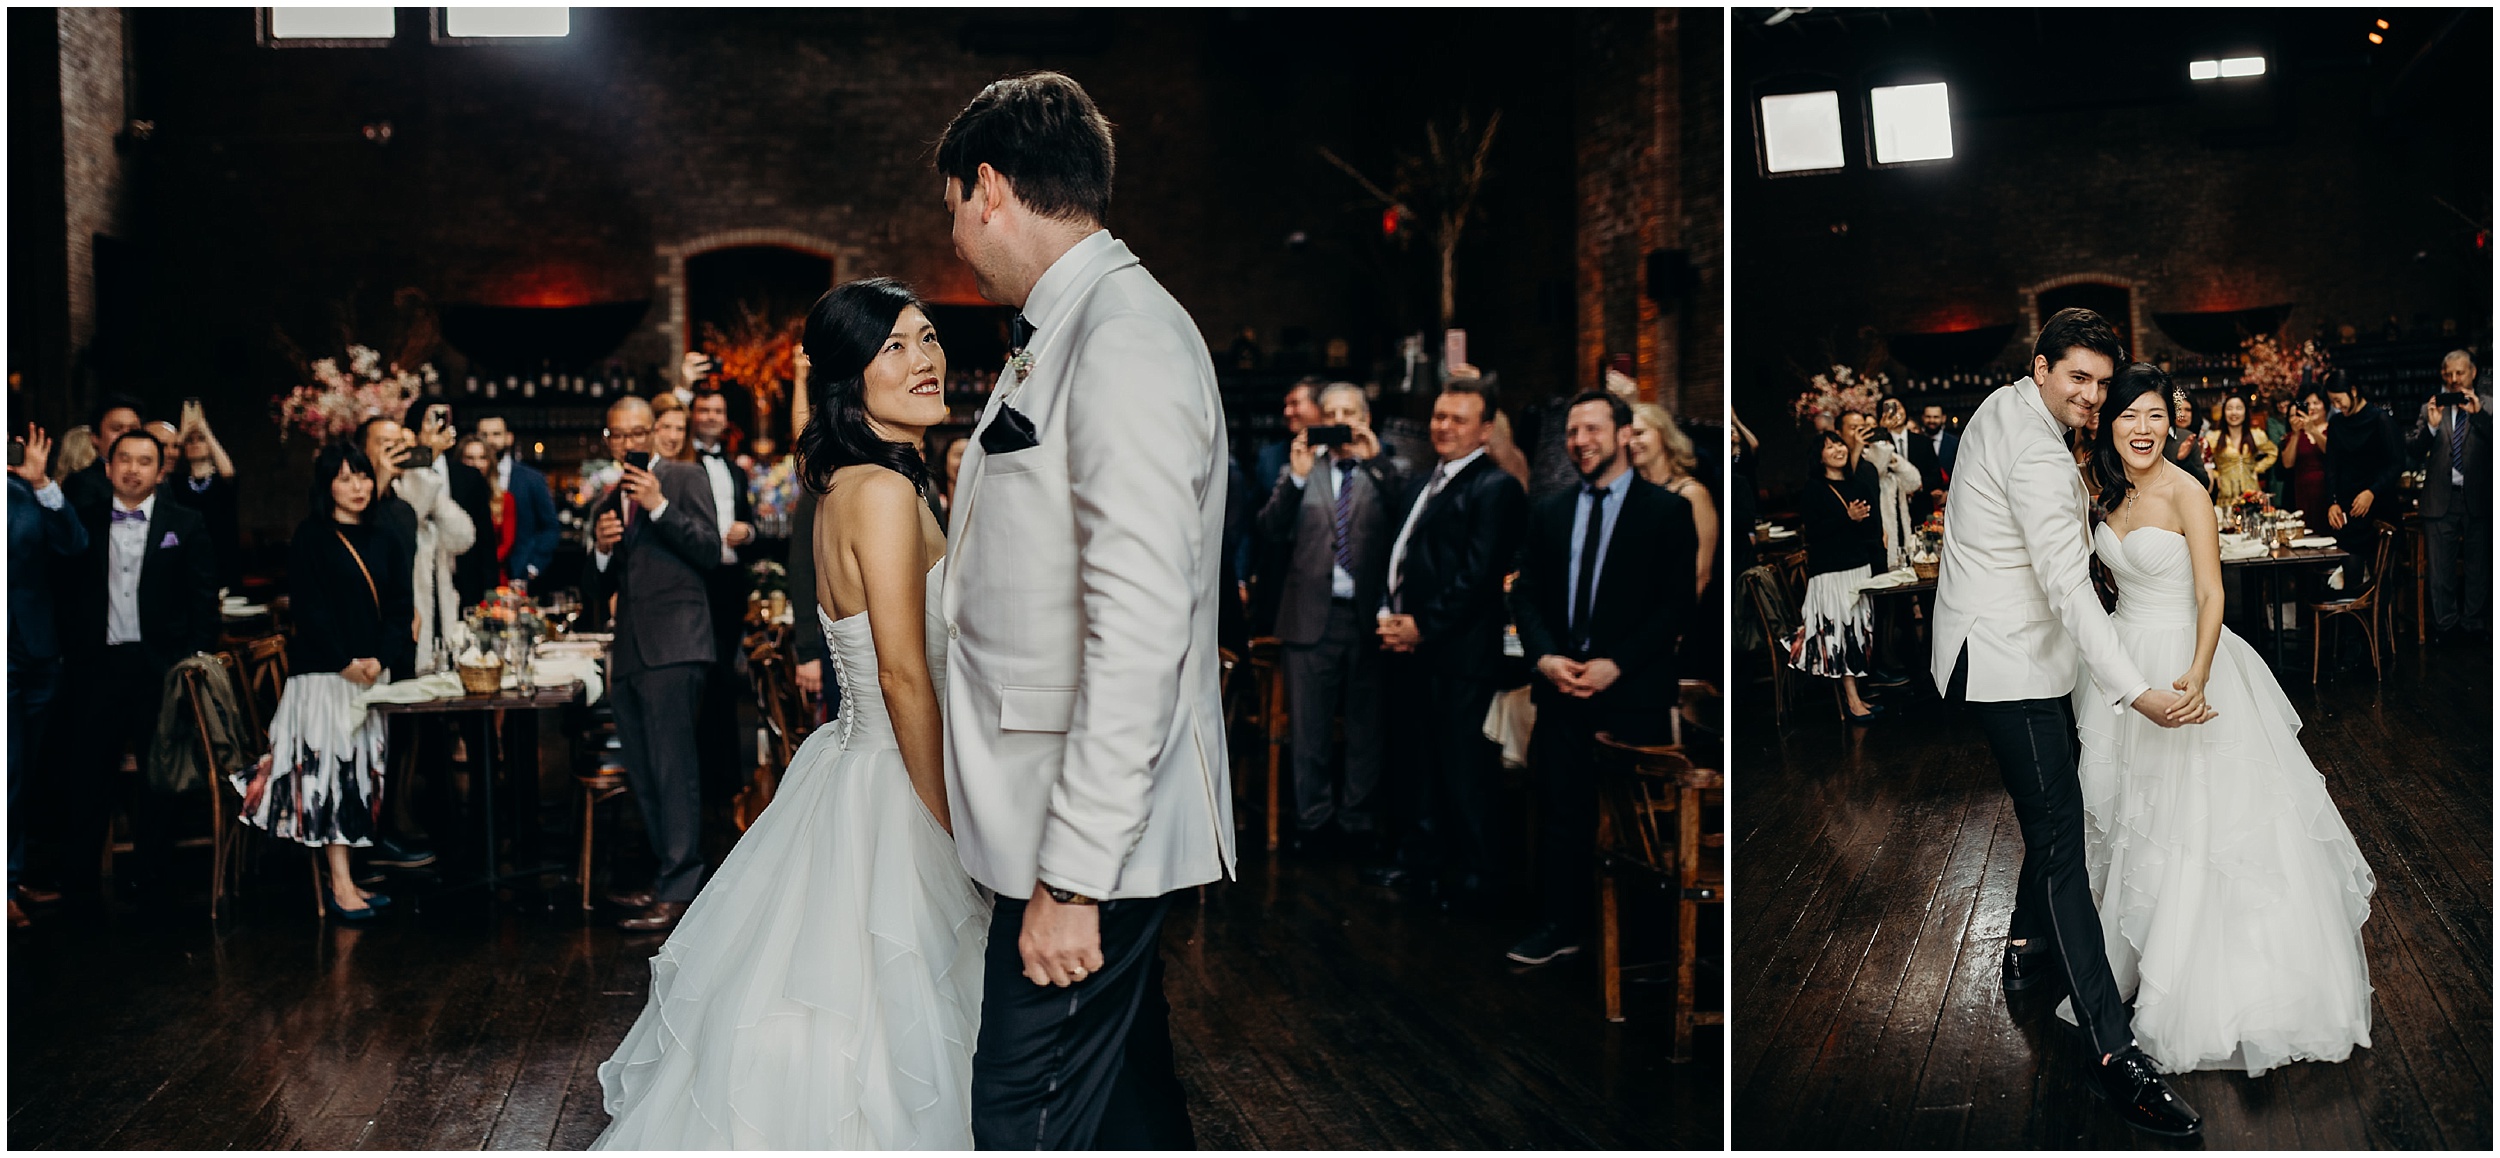 bride and groom share a first dance at mymoon in brooklyn, new york